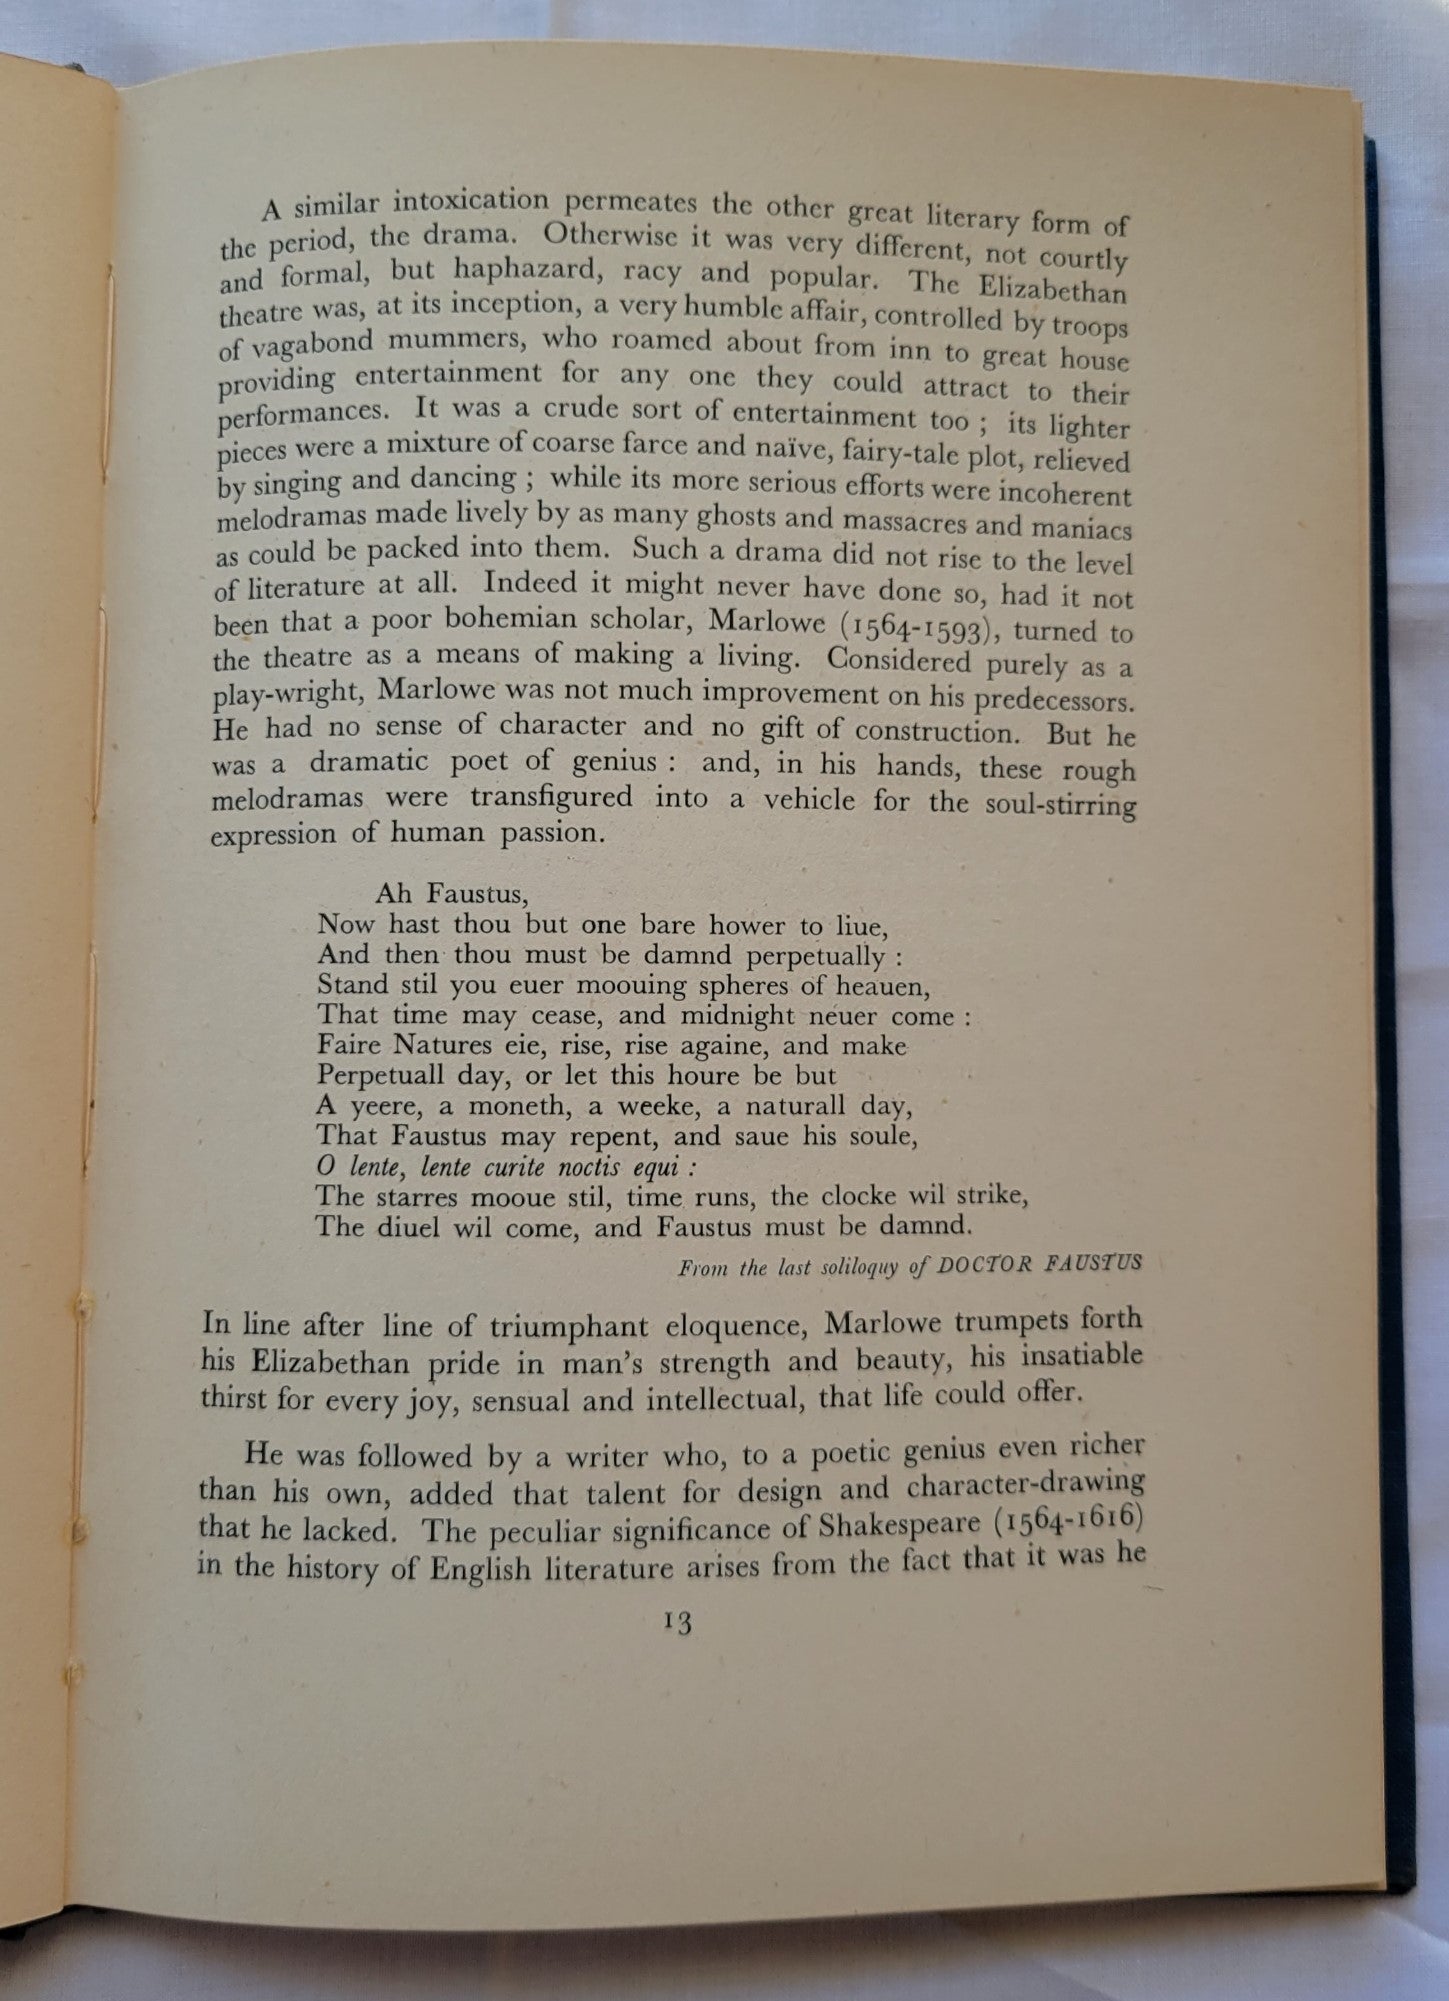 Vintage book for sale "The English Poets" by Lord David Cecil, published by Hastings House, 1940. Page 13